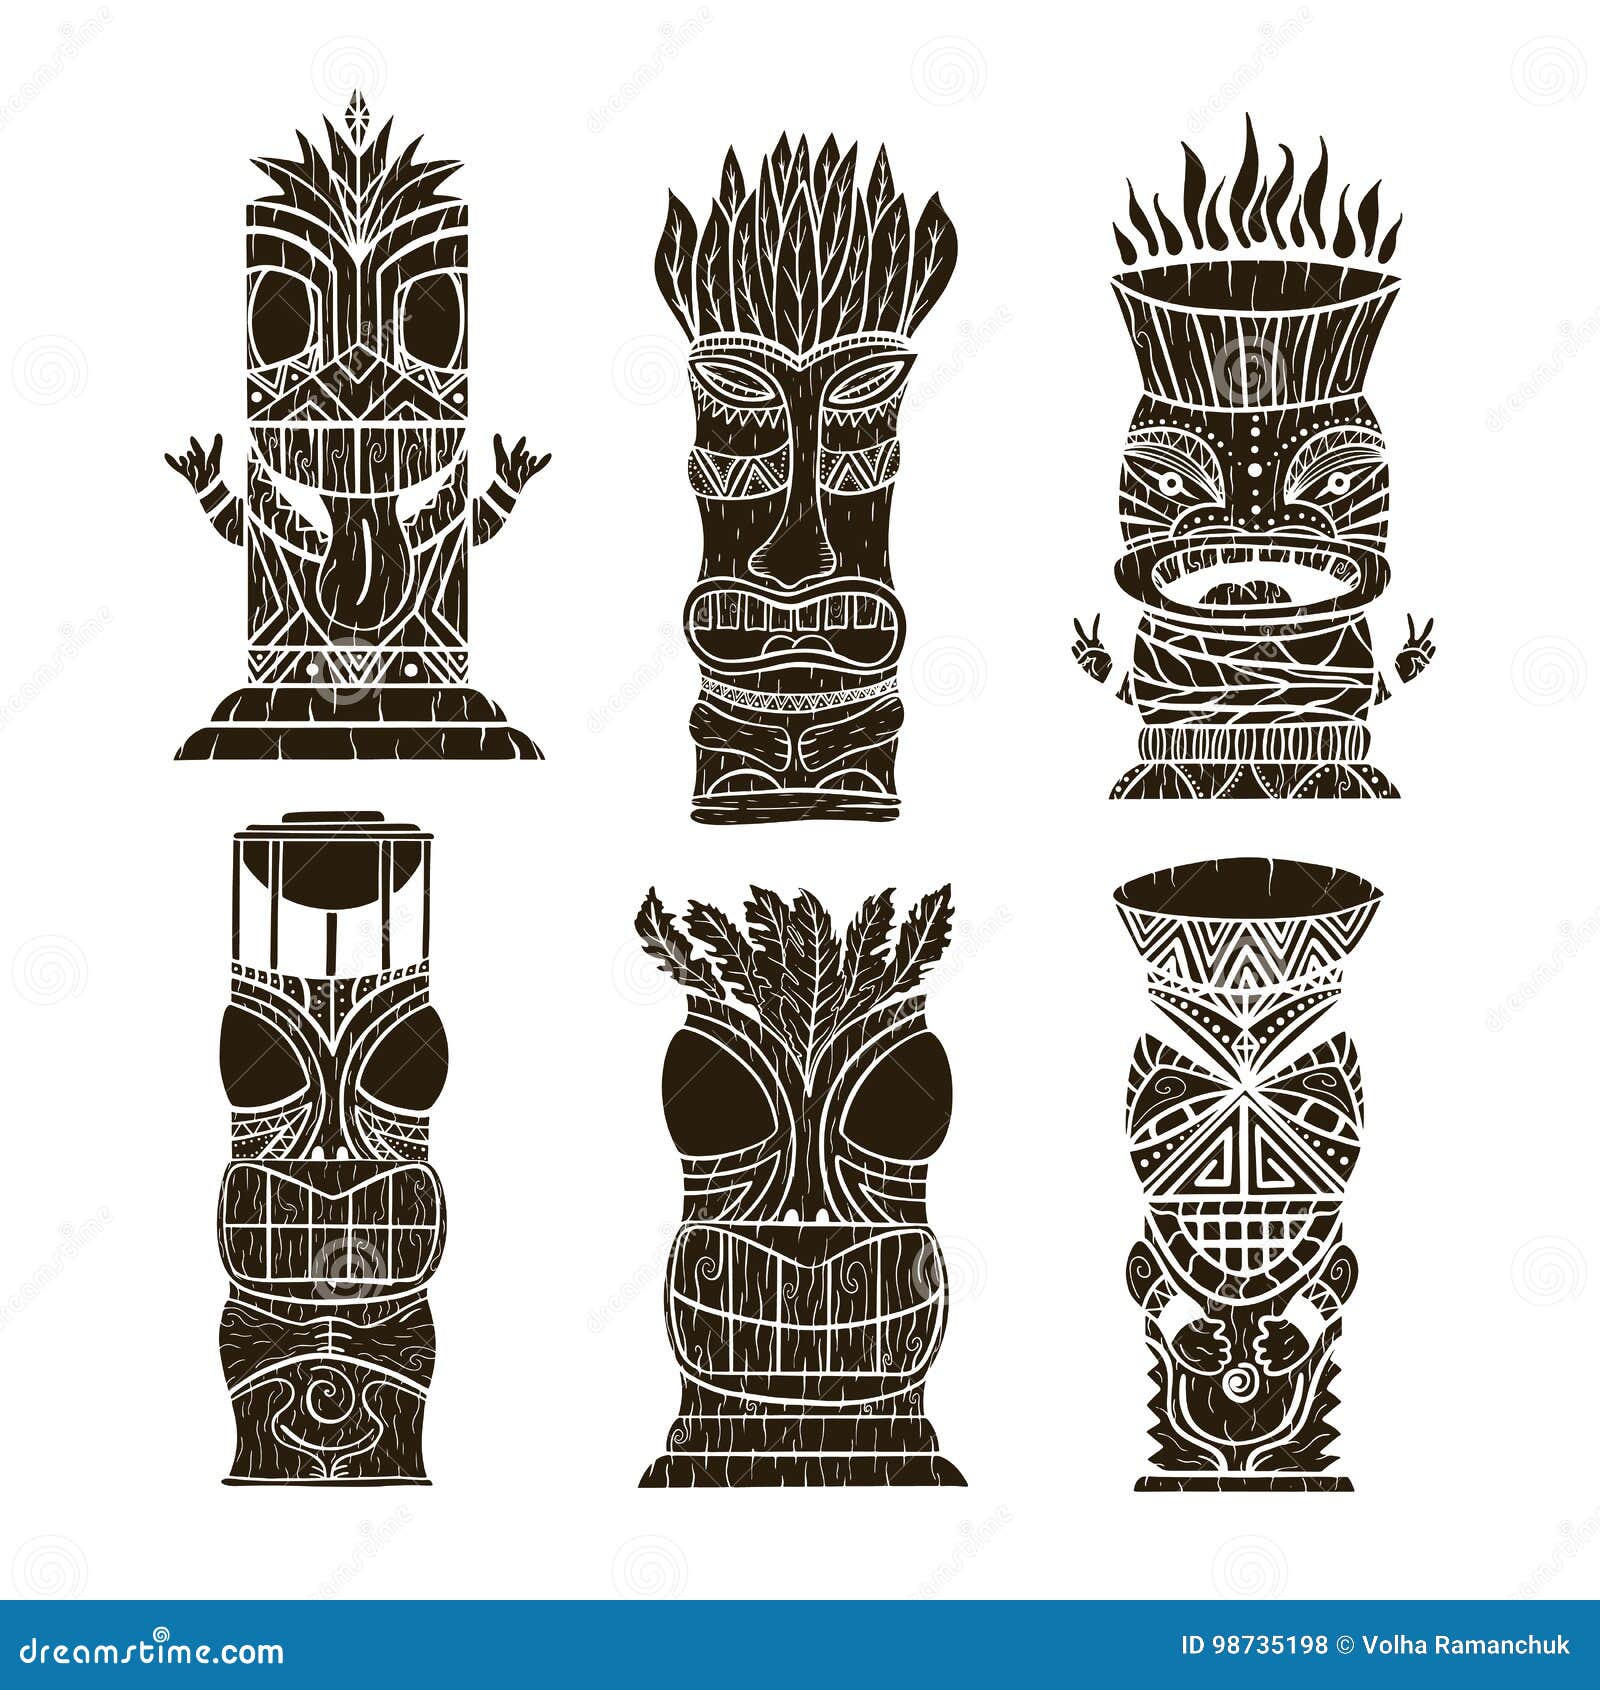 50 Wood Carving Tattoo Designs For Men  Masculine Ink Ideas  Tattoo  designs men Tattoo sleeve designs Tattoo designs